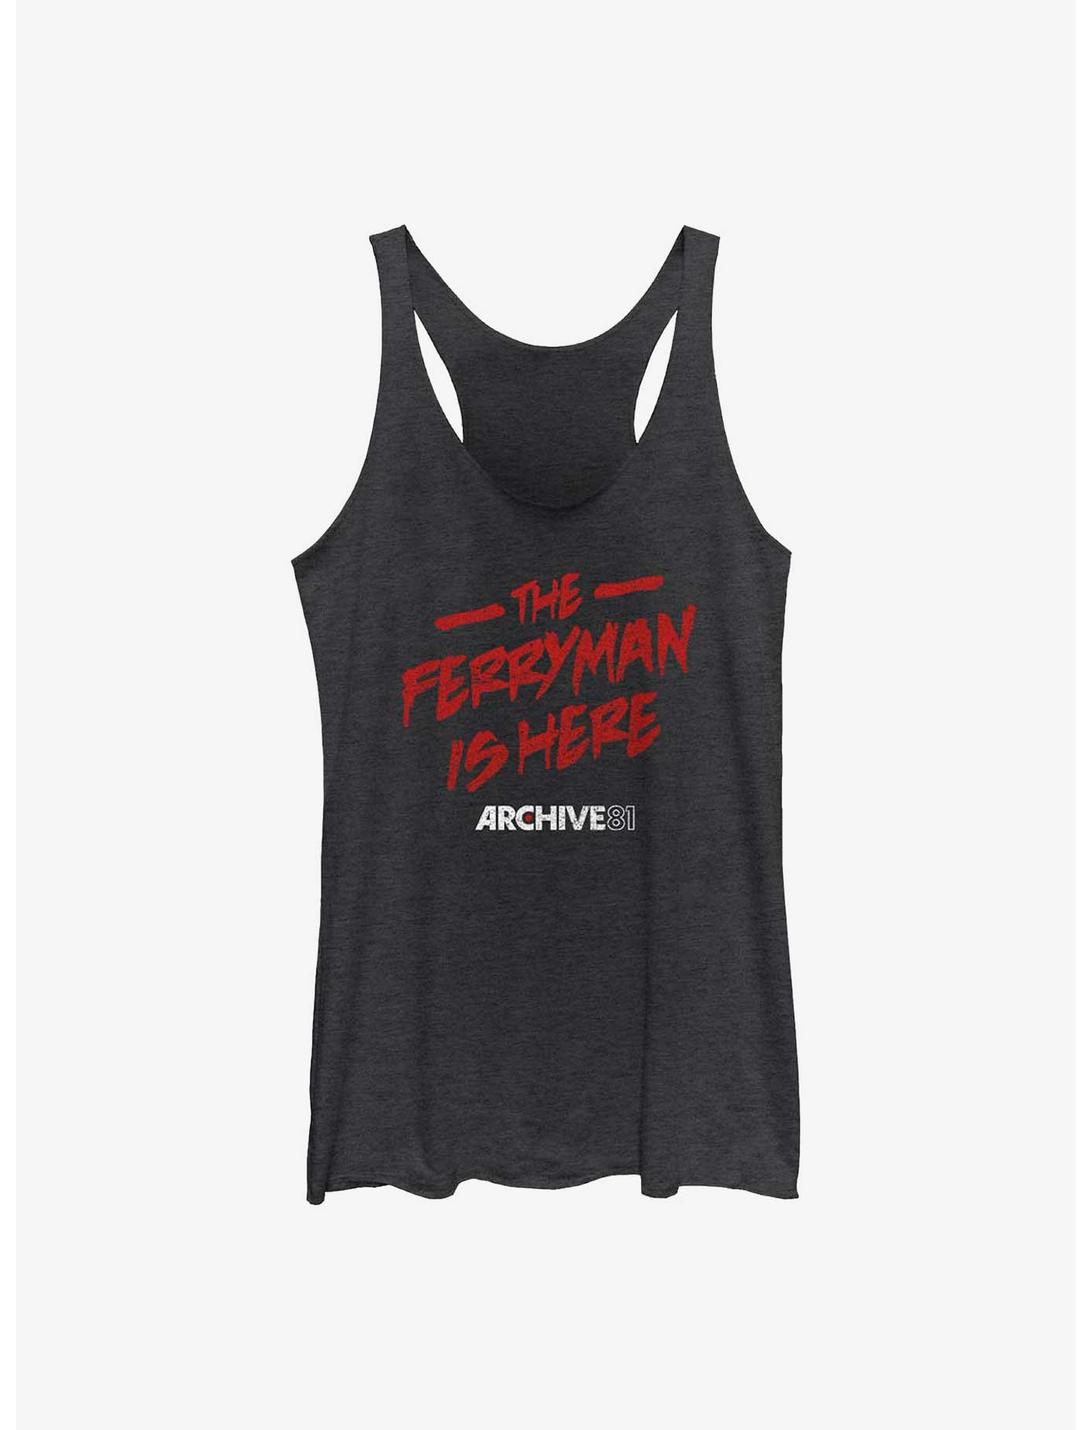 Archive 81 The Ferryman Is Here Womens Tank Top, BLK HTR, hi-res